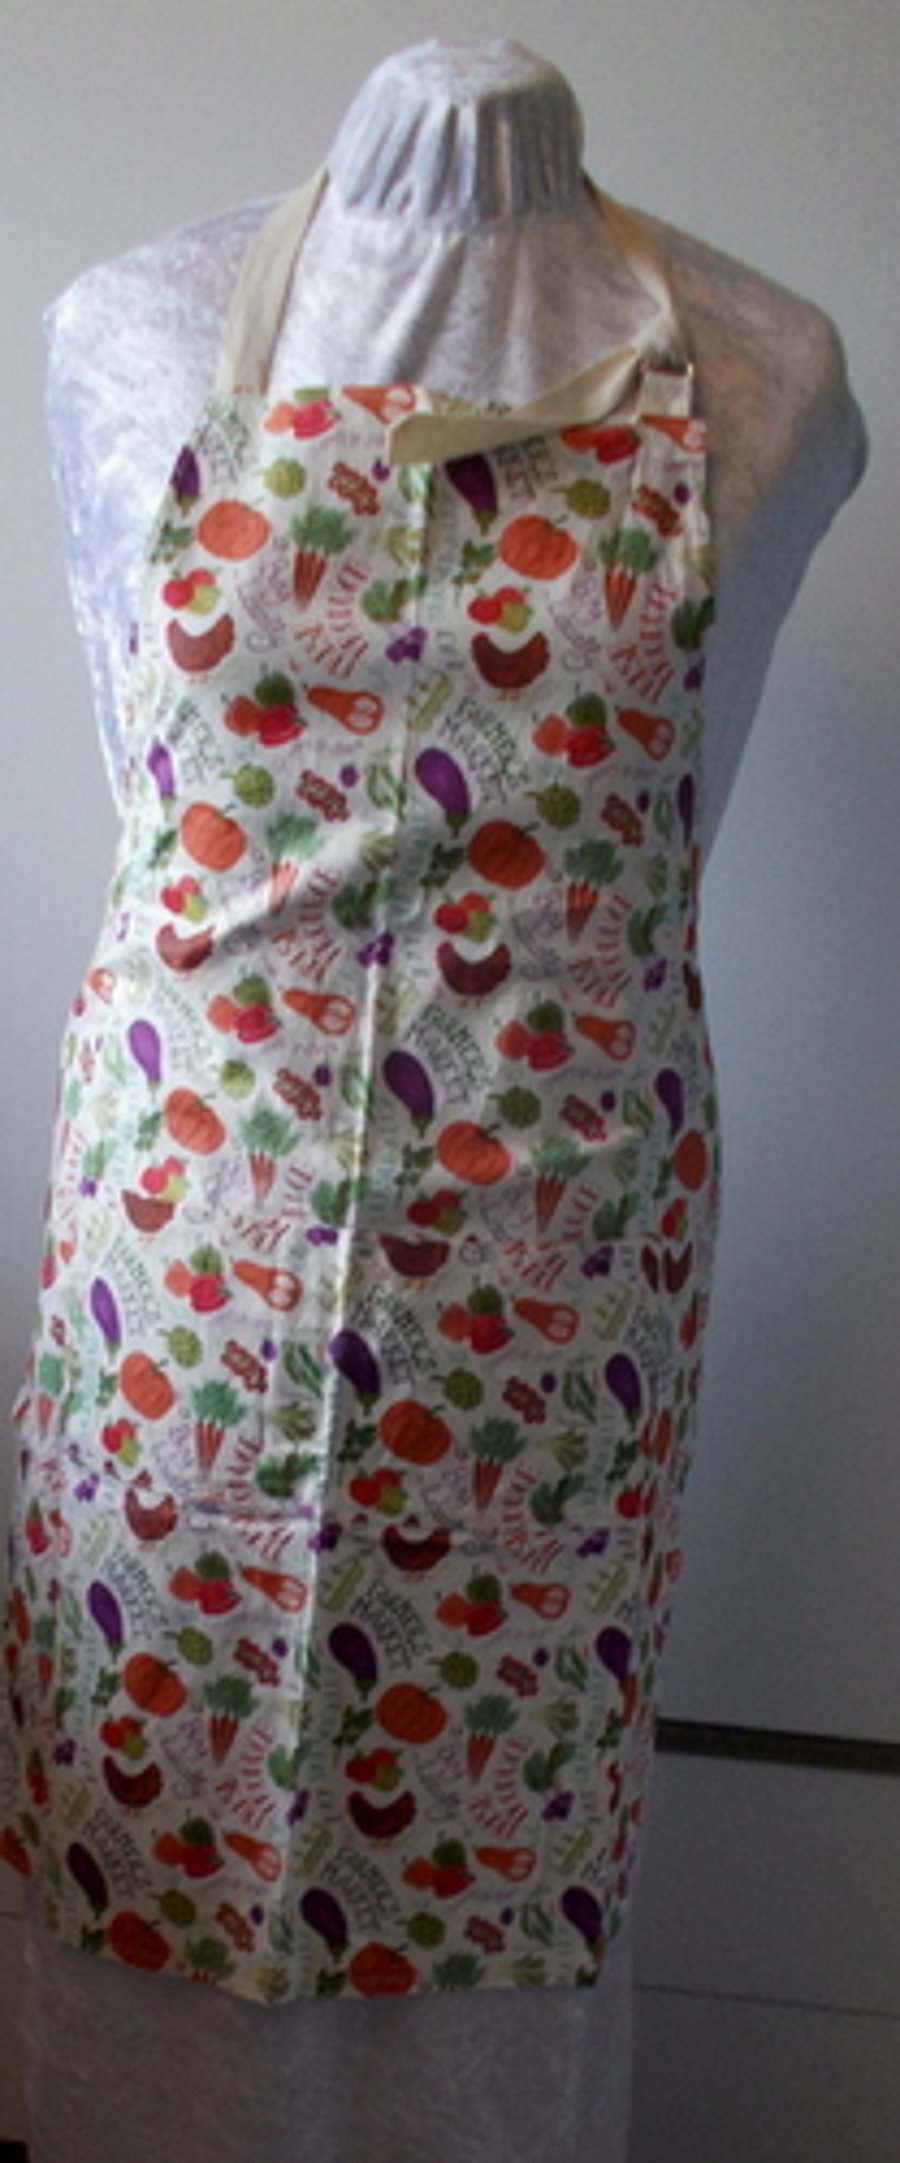 Hand made full apron with print of fresh fruit and veg.